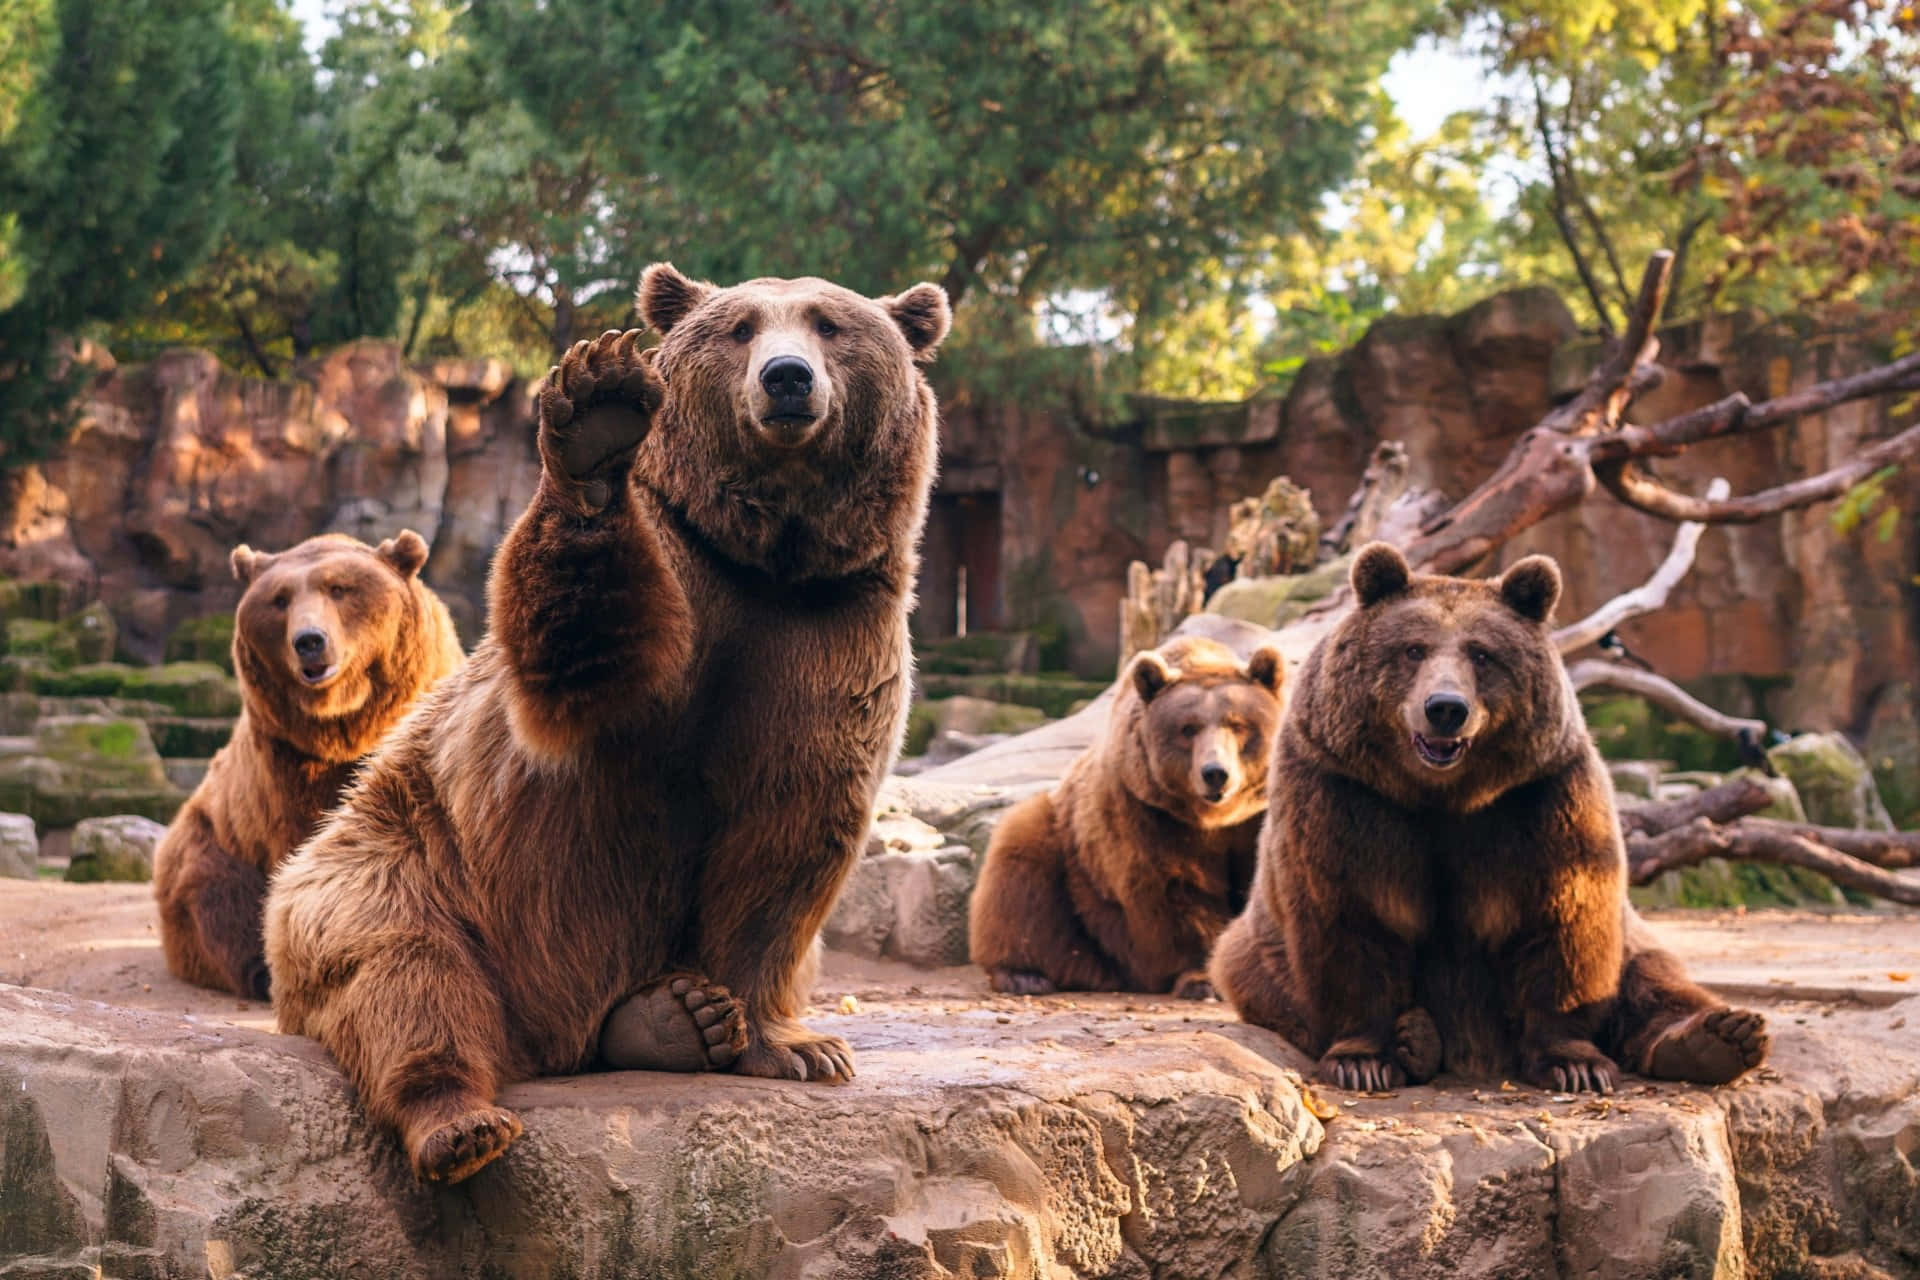 Caption: Majestic Grizzly Bears At The Zoo